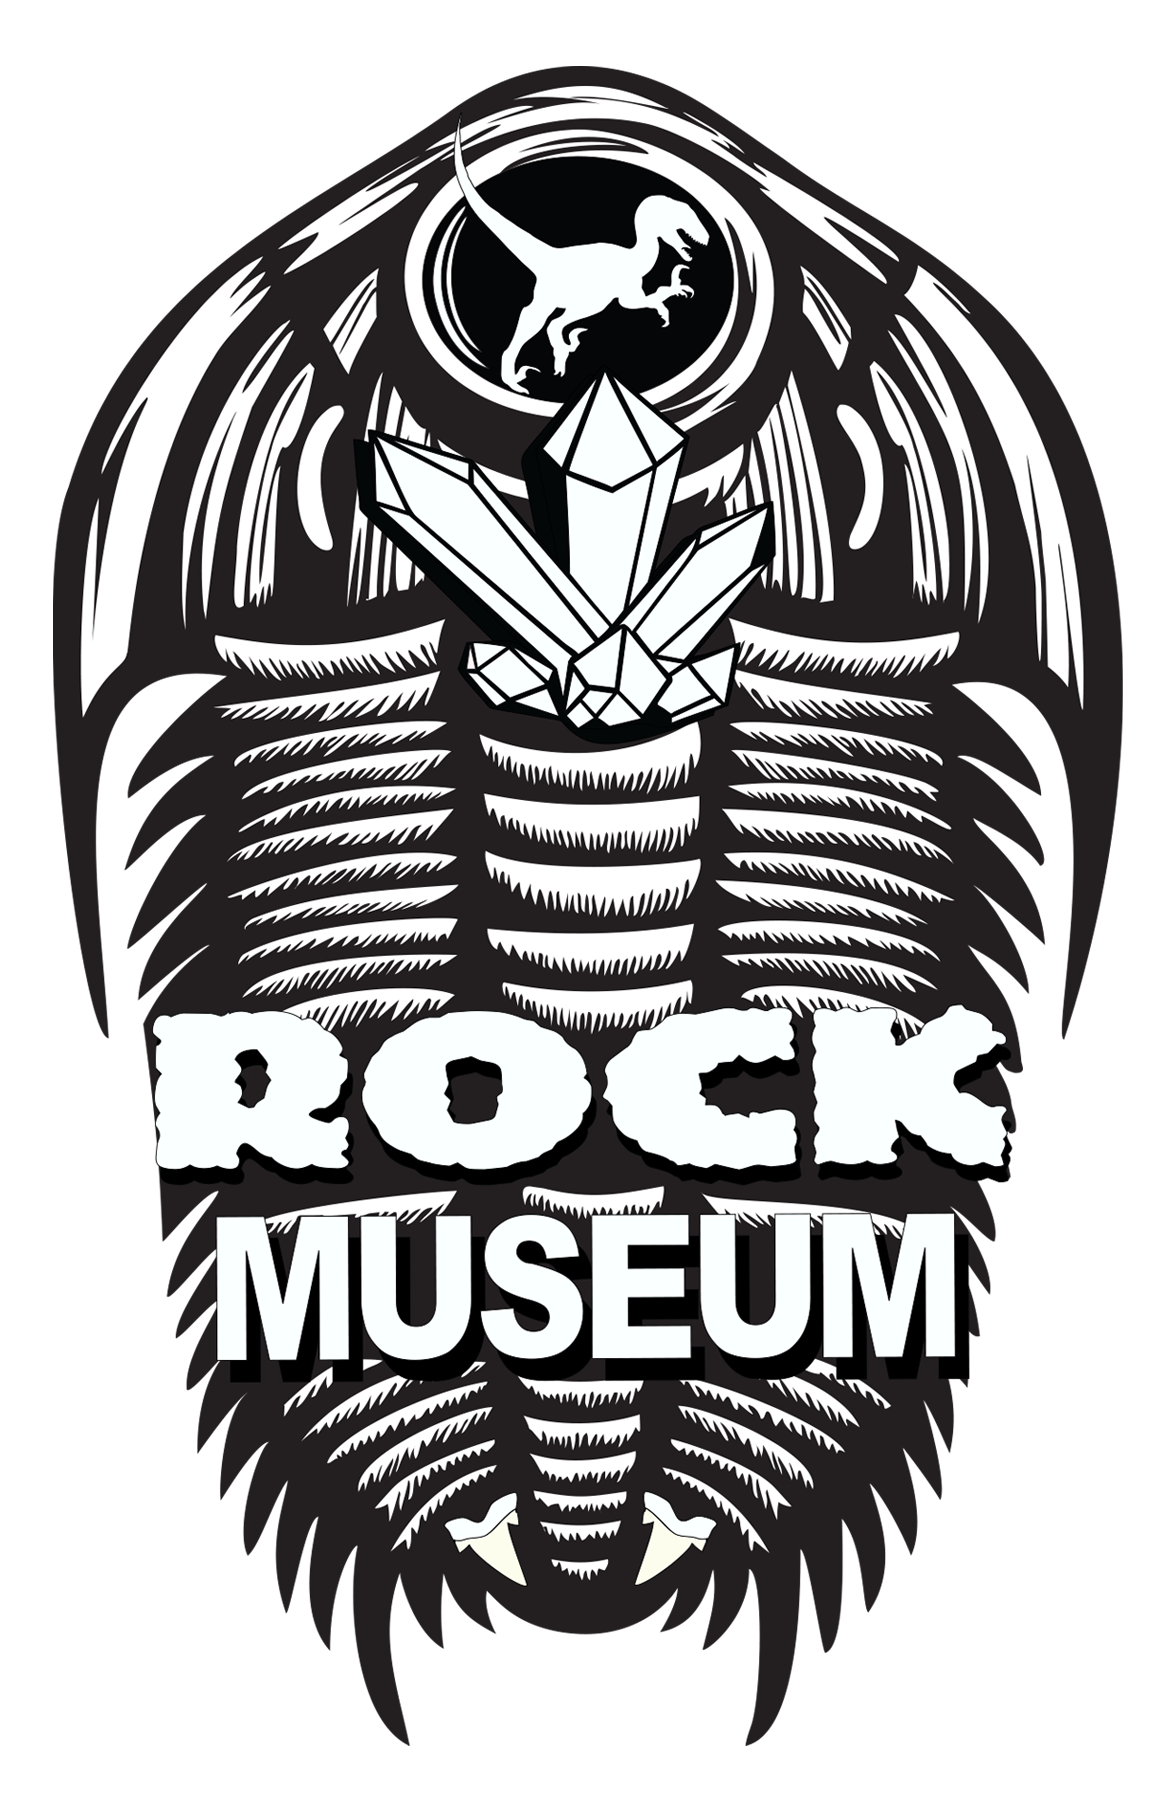 A black and white logo for the rock museum.